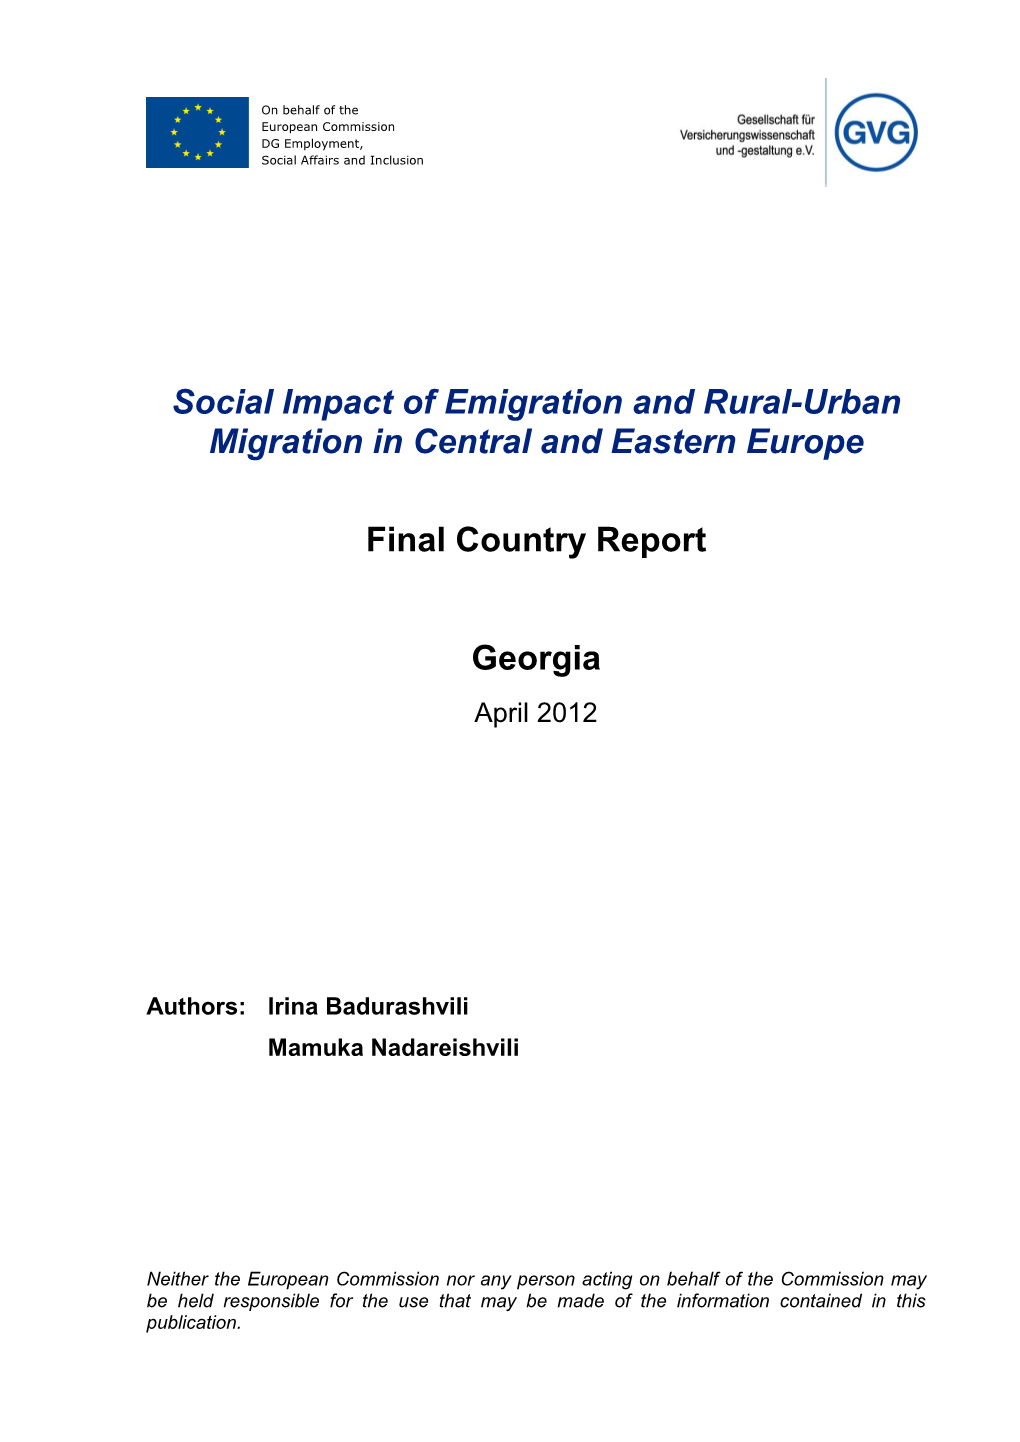 Social Impact of Emigration and Rural-Urban Migration in Georgia